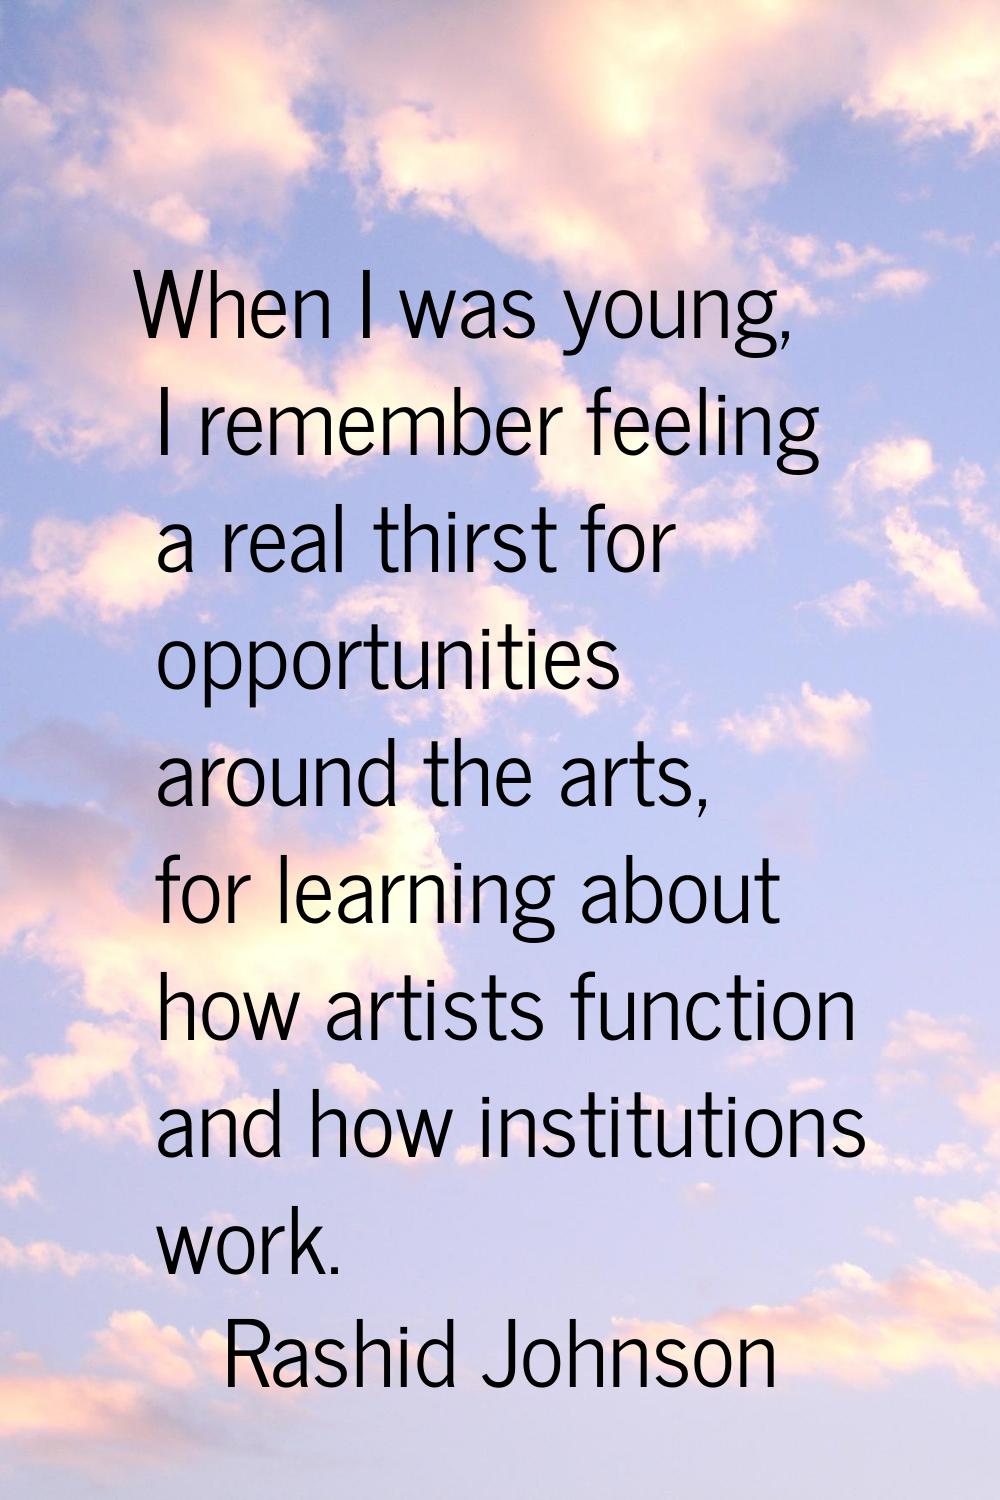 When I was young, I remember feeling a real thirst for opportunities around the arts, for learning 